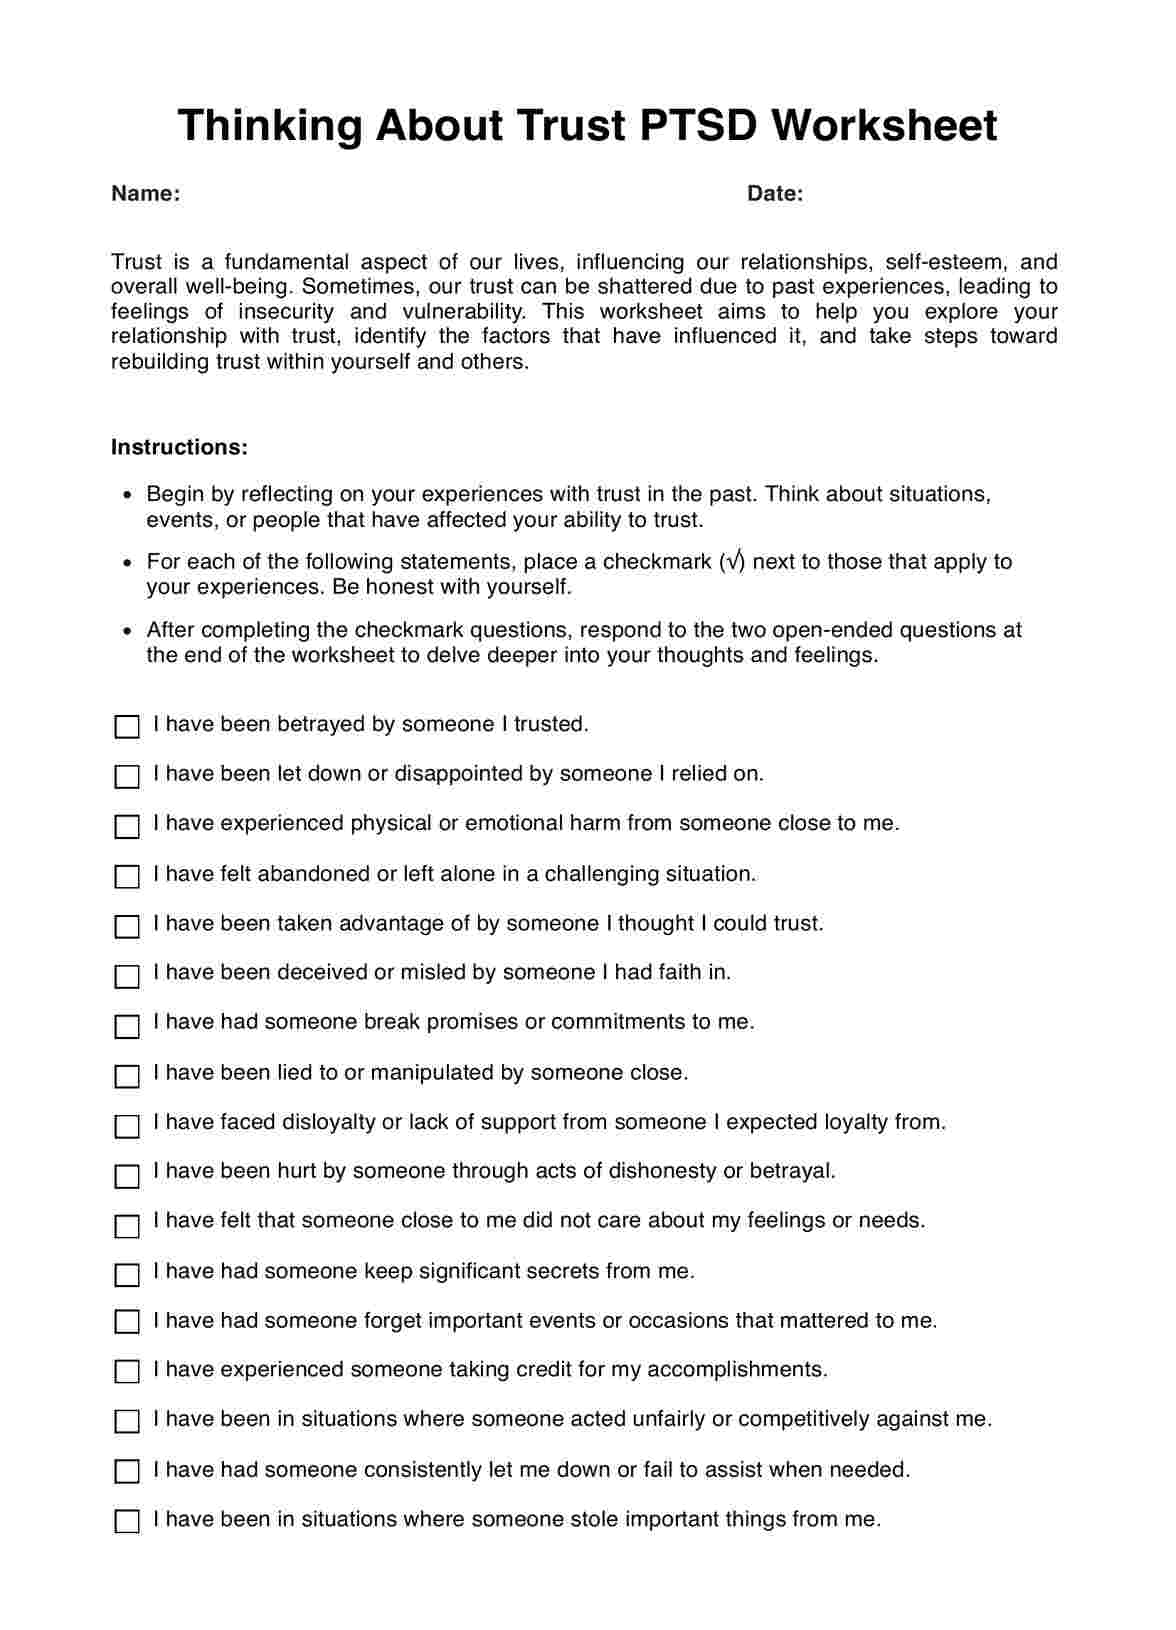 Thinking About Trust PTSD Worksheet PDF Example